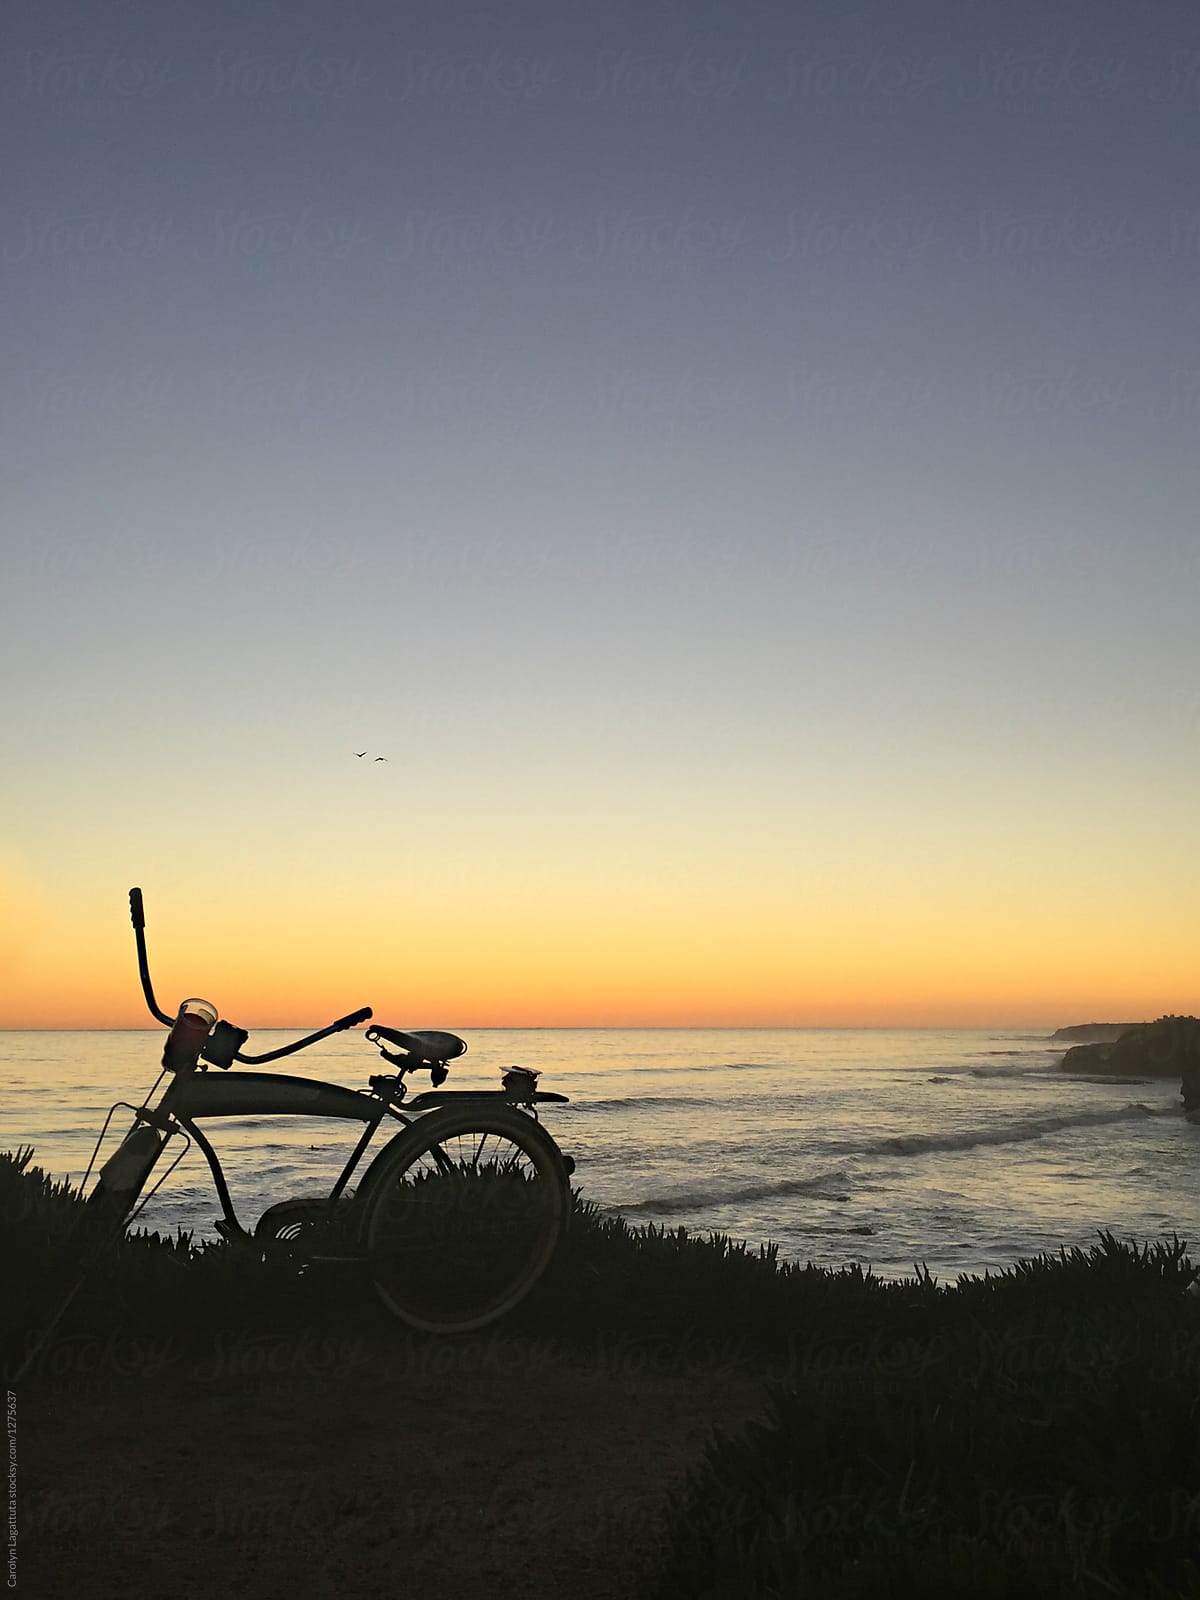 Cruiser bike parked by the ocean at sunset